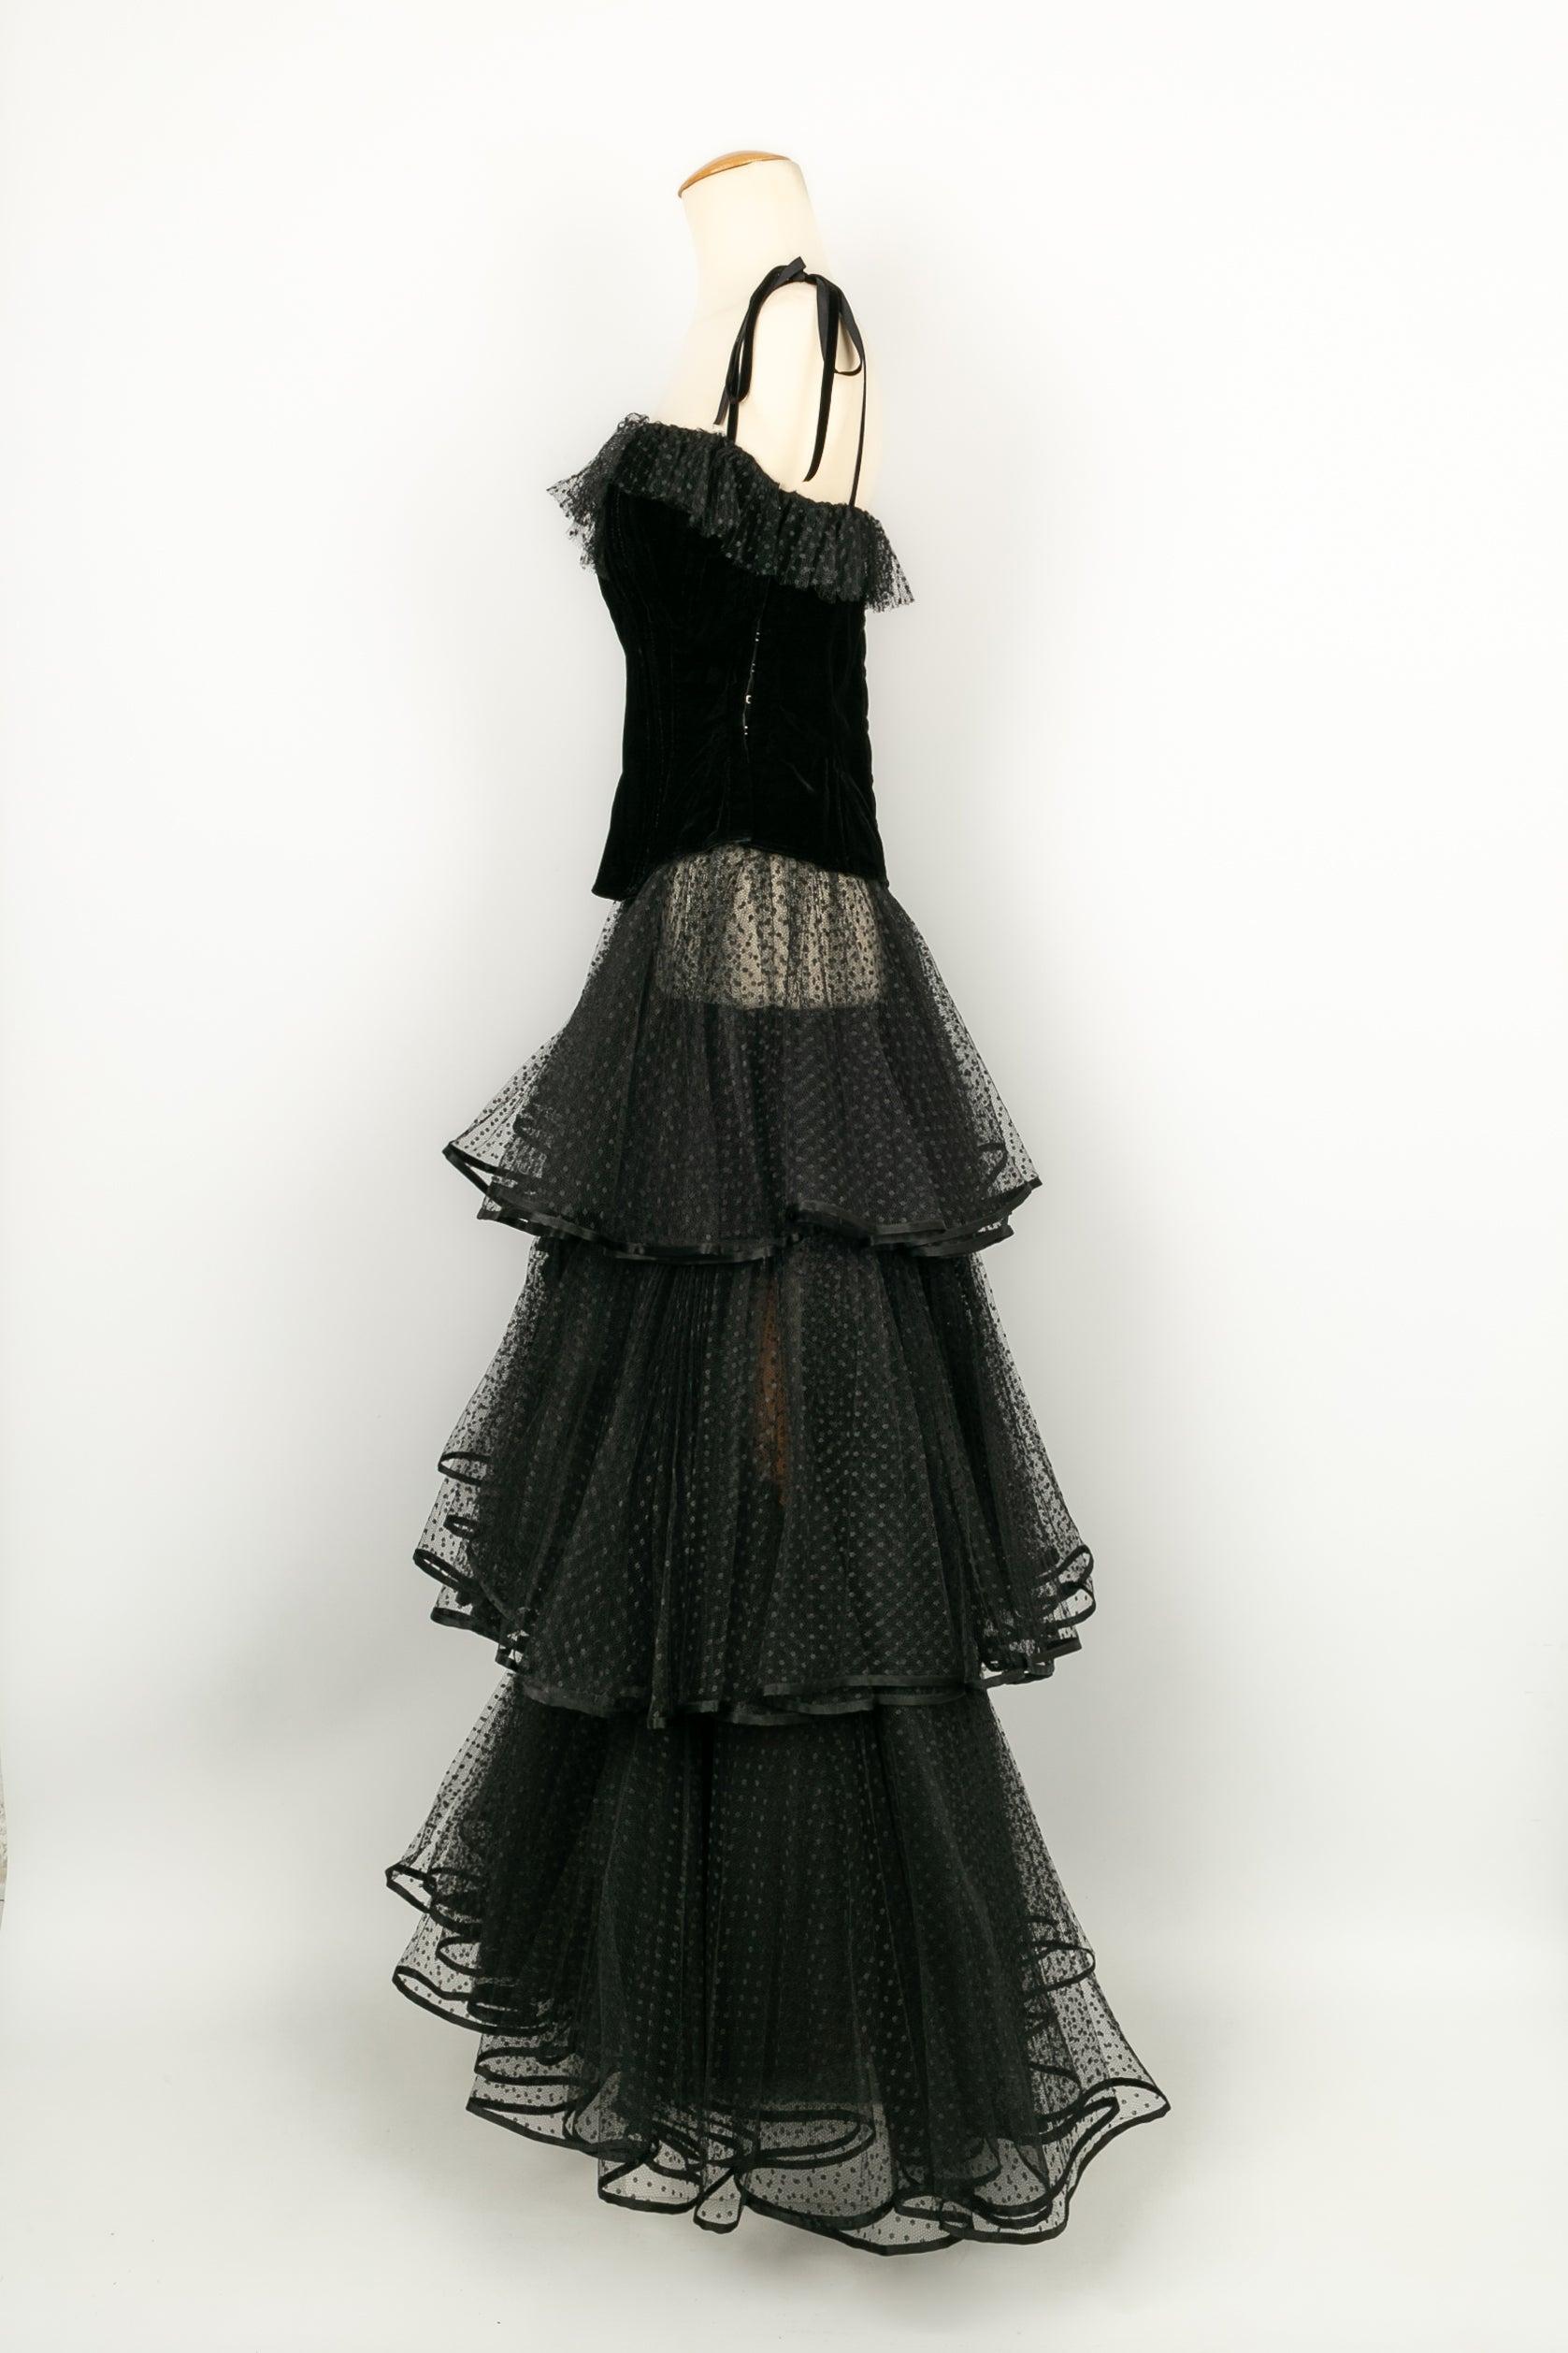 Valentino - (Made in Italy) Set composed of a semi-transparent skirt with flounces in black Swiss dot tulle and a bustier top with thin straps in black velvet and Swiss dot tulle. No size indicated, it fits a 36FR/38FR.

Additional